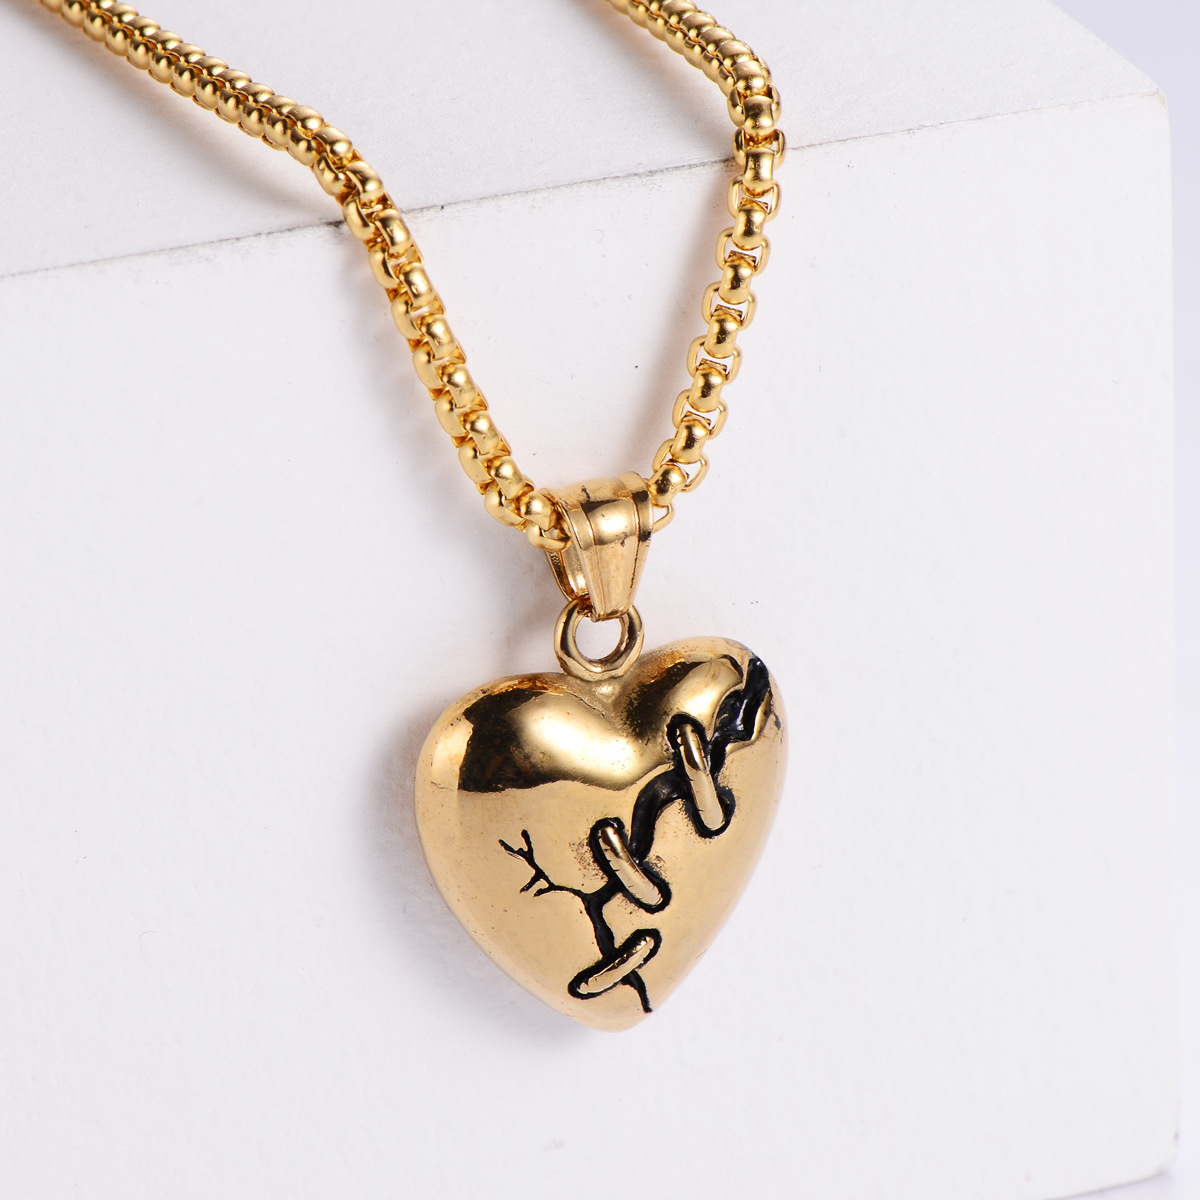 4:【Gold】with chain pendant